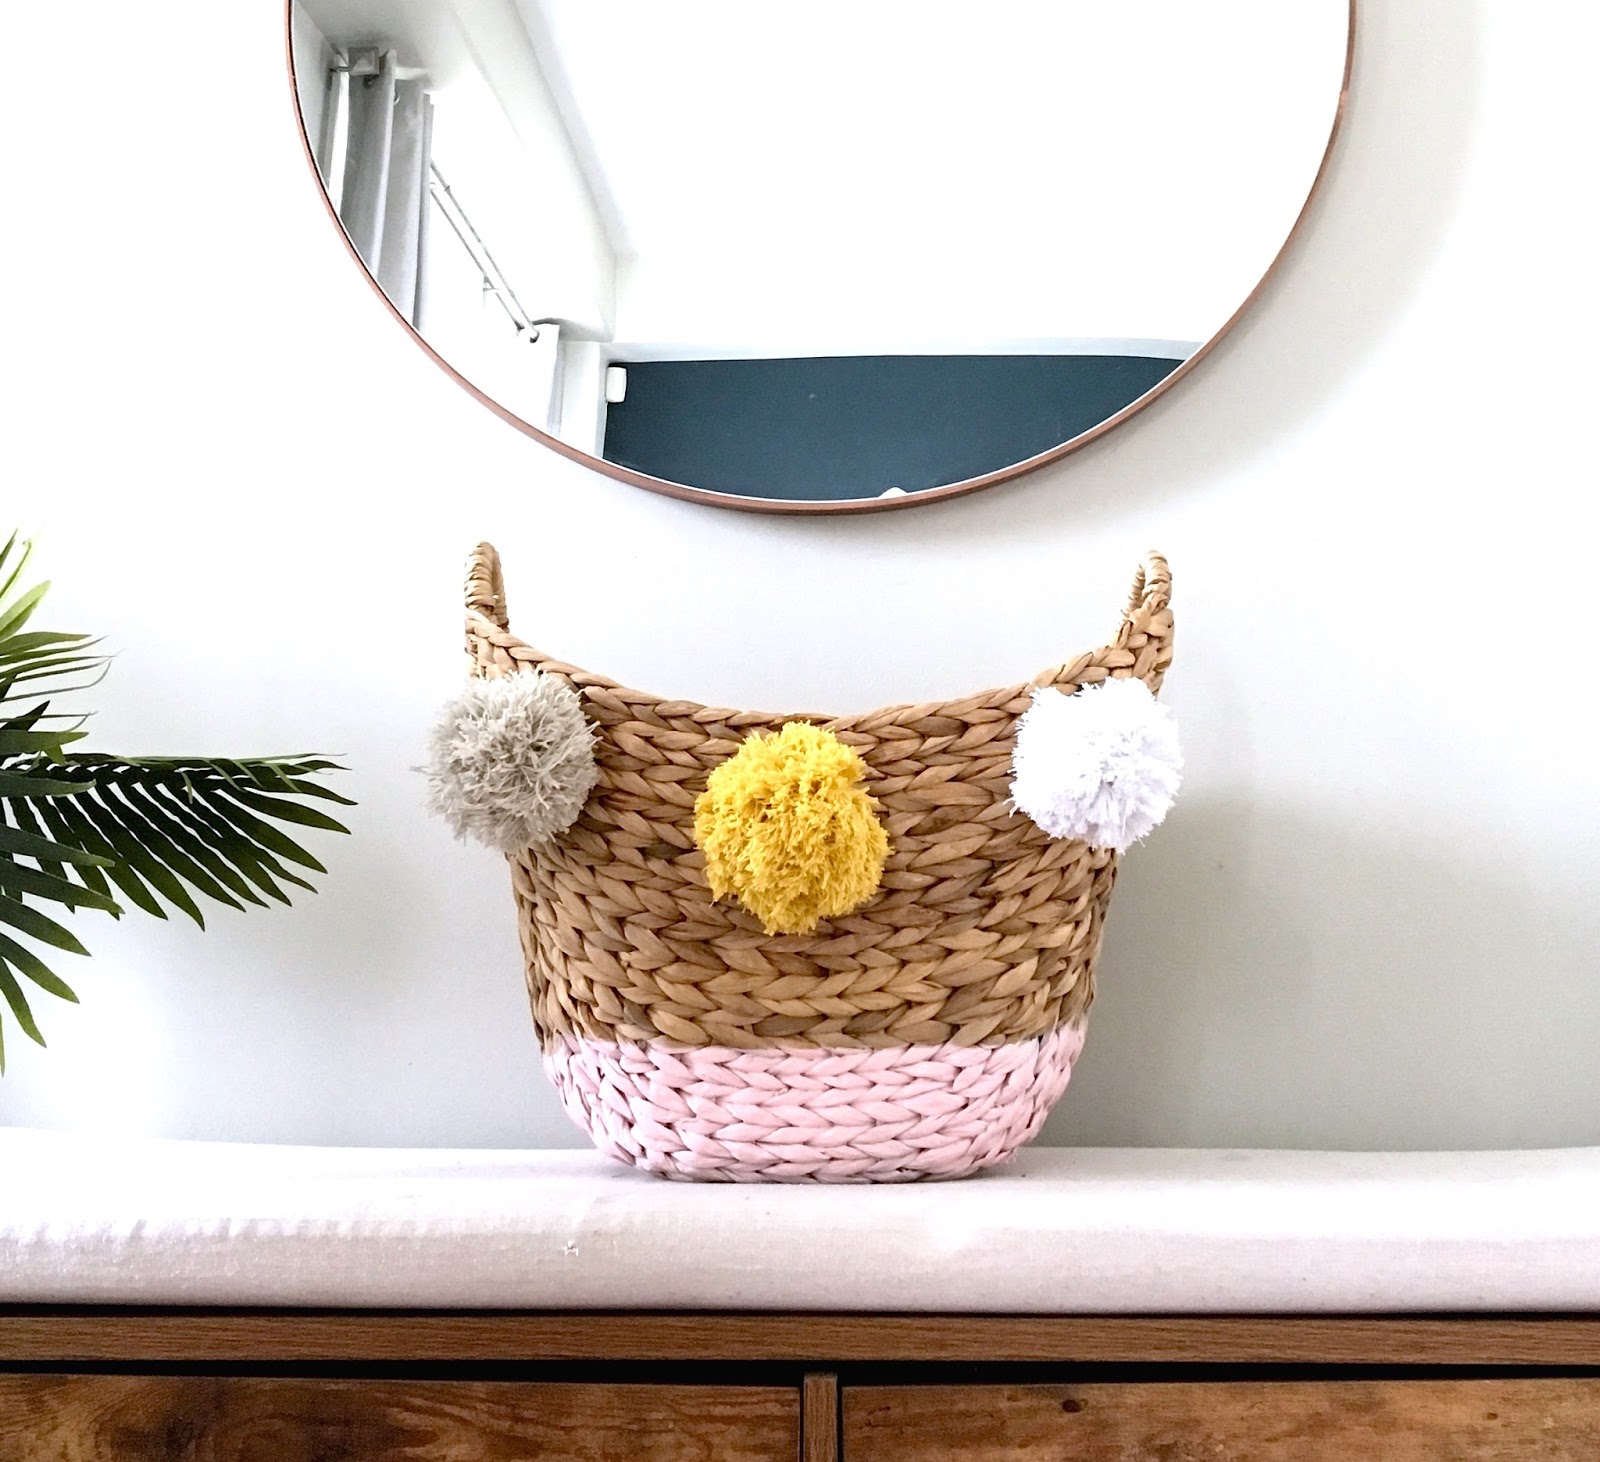 https://2.bp.blogspot.com/-8uOgCJlcPIc/WuuoUw2NIuI/AAAAAAAAF7U/tO600pVxBj4zO0RXE-uvSr85_E4g_uBtwCEwYBhgL/s1600/DIY-paint-dipped-basket-with-spray-paint-harlow-and-thistle-10.jpg